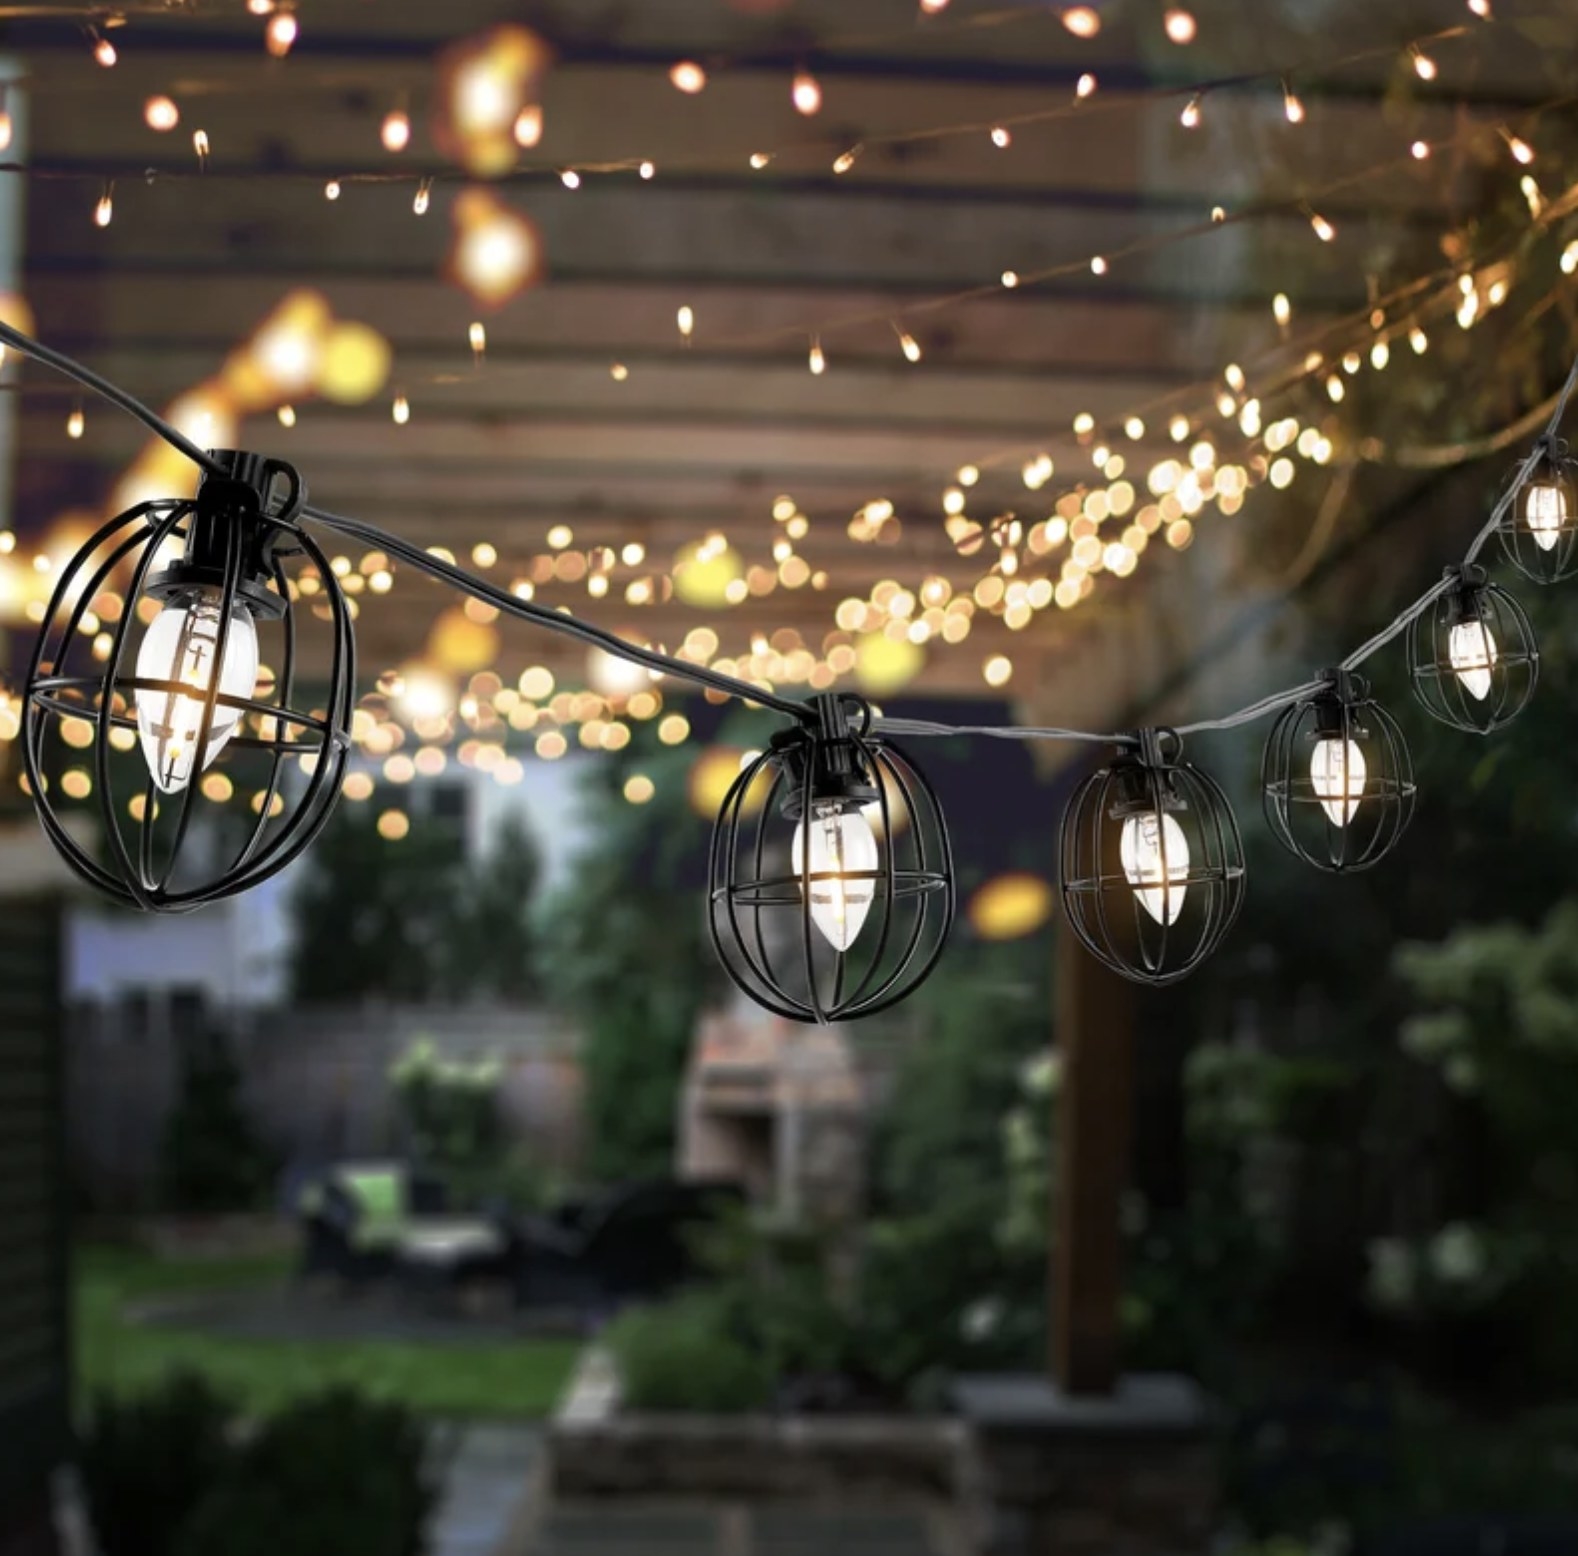 The string lights hung up outside